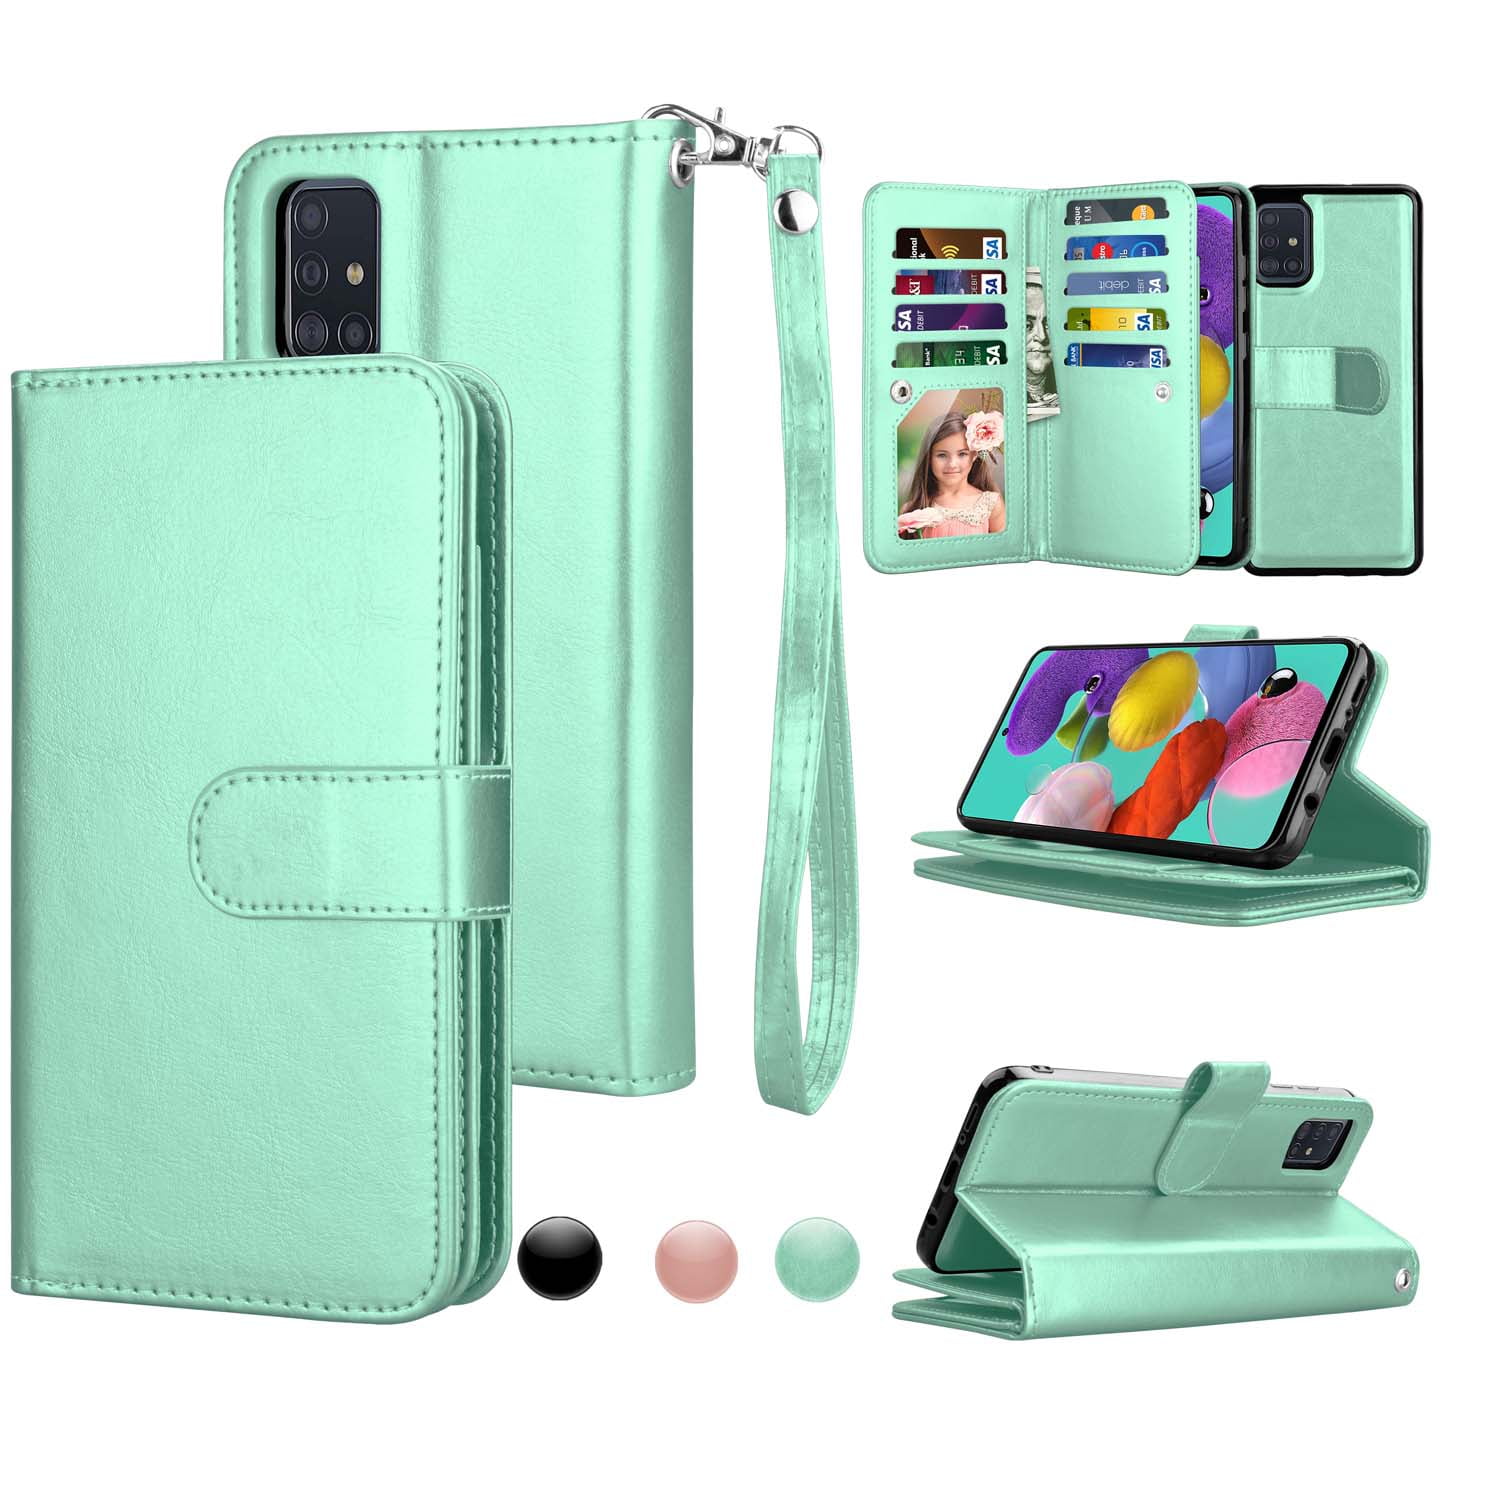 Samsung Galaxy S10 Plus Flip Case Cover for Leather Kickstand Card Holders Extra-Protective Business Wallet case Flip Cover